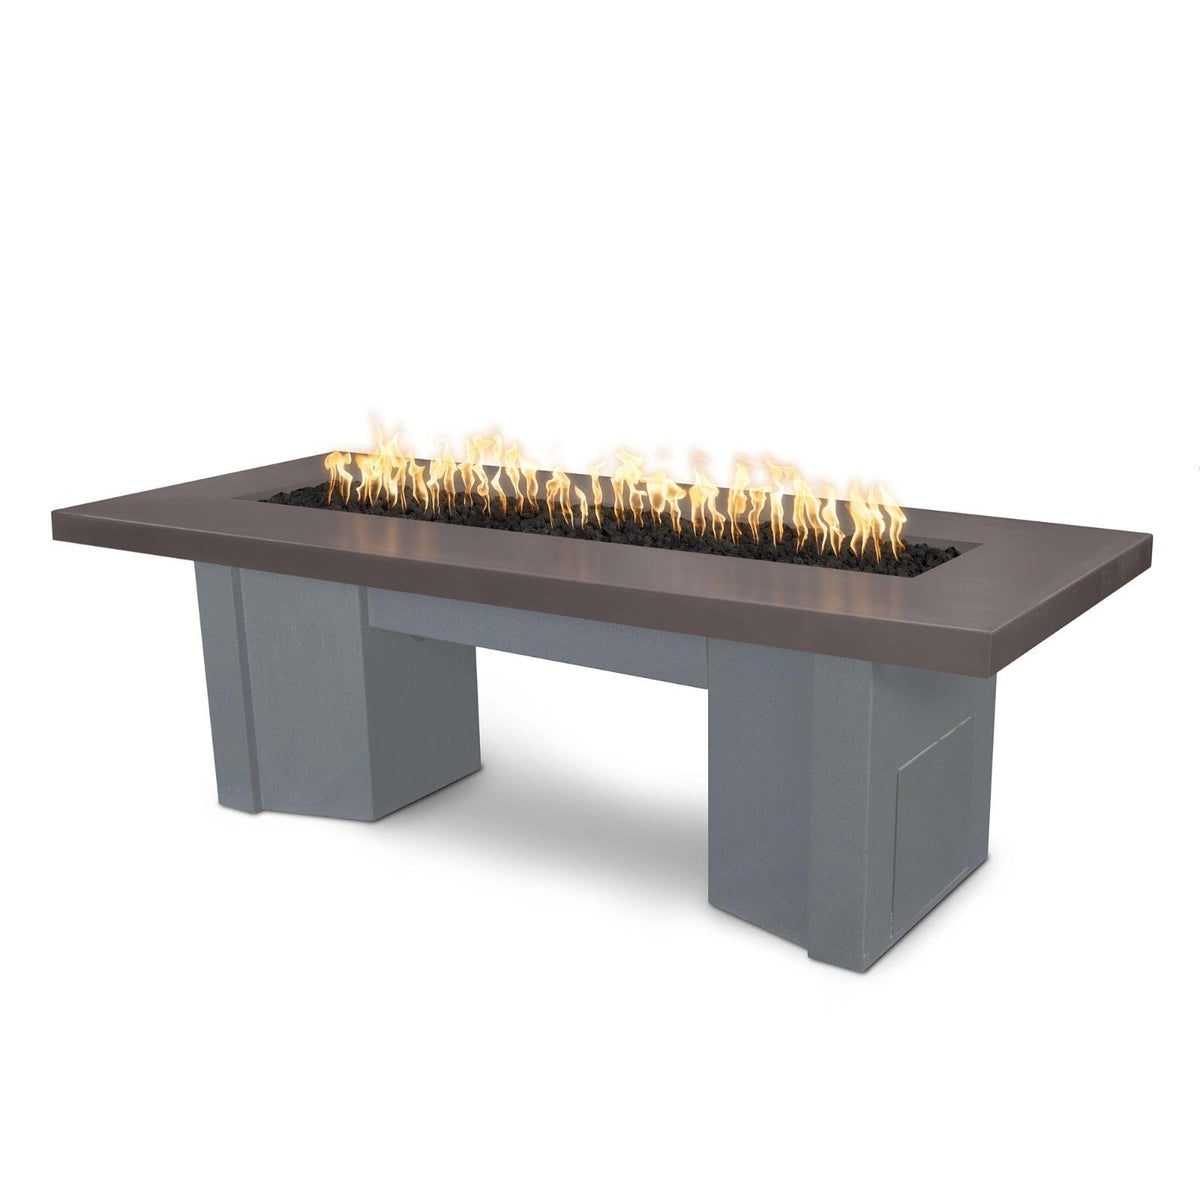 The Outdoor Plus Fire Features Chestnut (-CST) / Gray Powder Coated Steel (-GRY) The Outdoor Plus 78&quot; Alameda Fire Table Smooth Concrete in Natural Gas - Flame Sense System with Push Button Spark Igniter / OPT-ALMGFRC78FSEN-NG